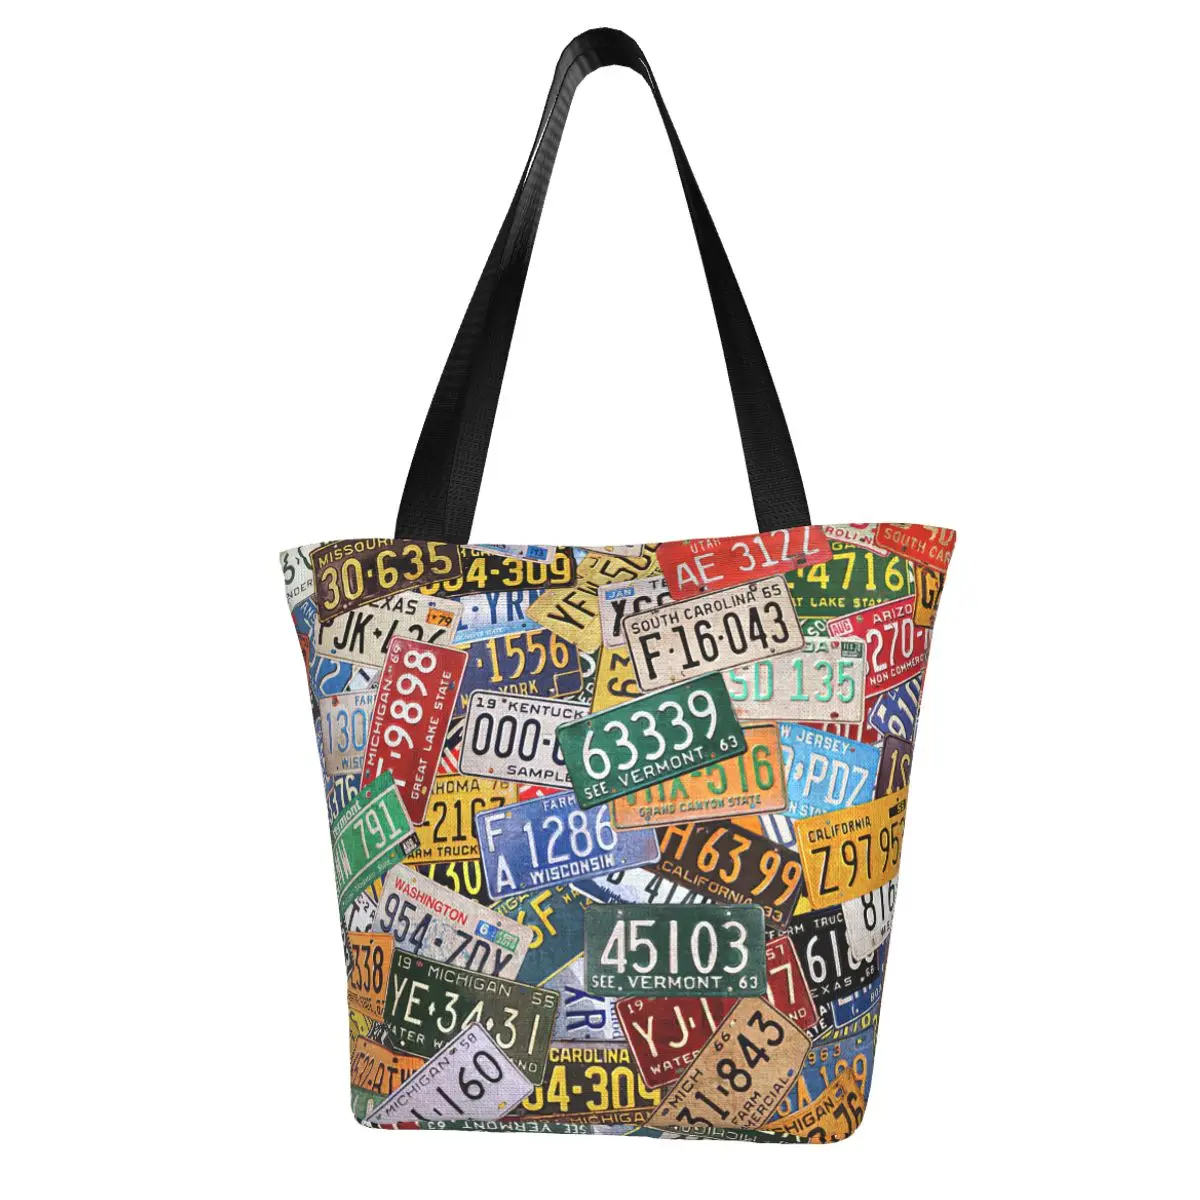 Colorful Assorted Vintage License Plates From All 50 States Shopping Bag Aesthetic Cloth Outdoor Handbag Female Fashion Bags